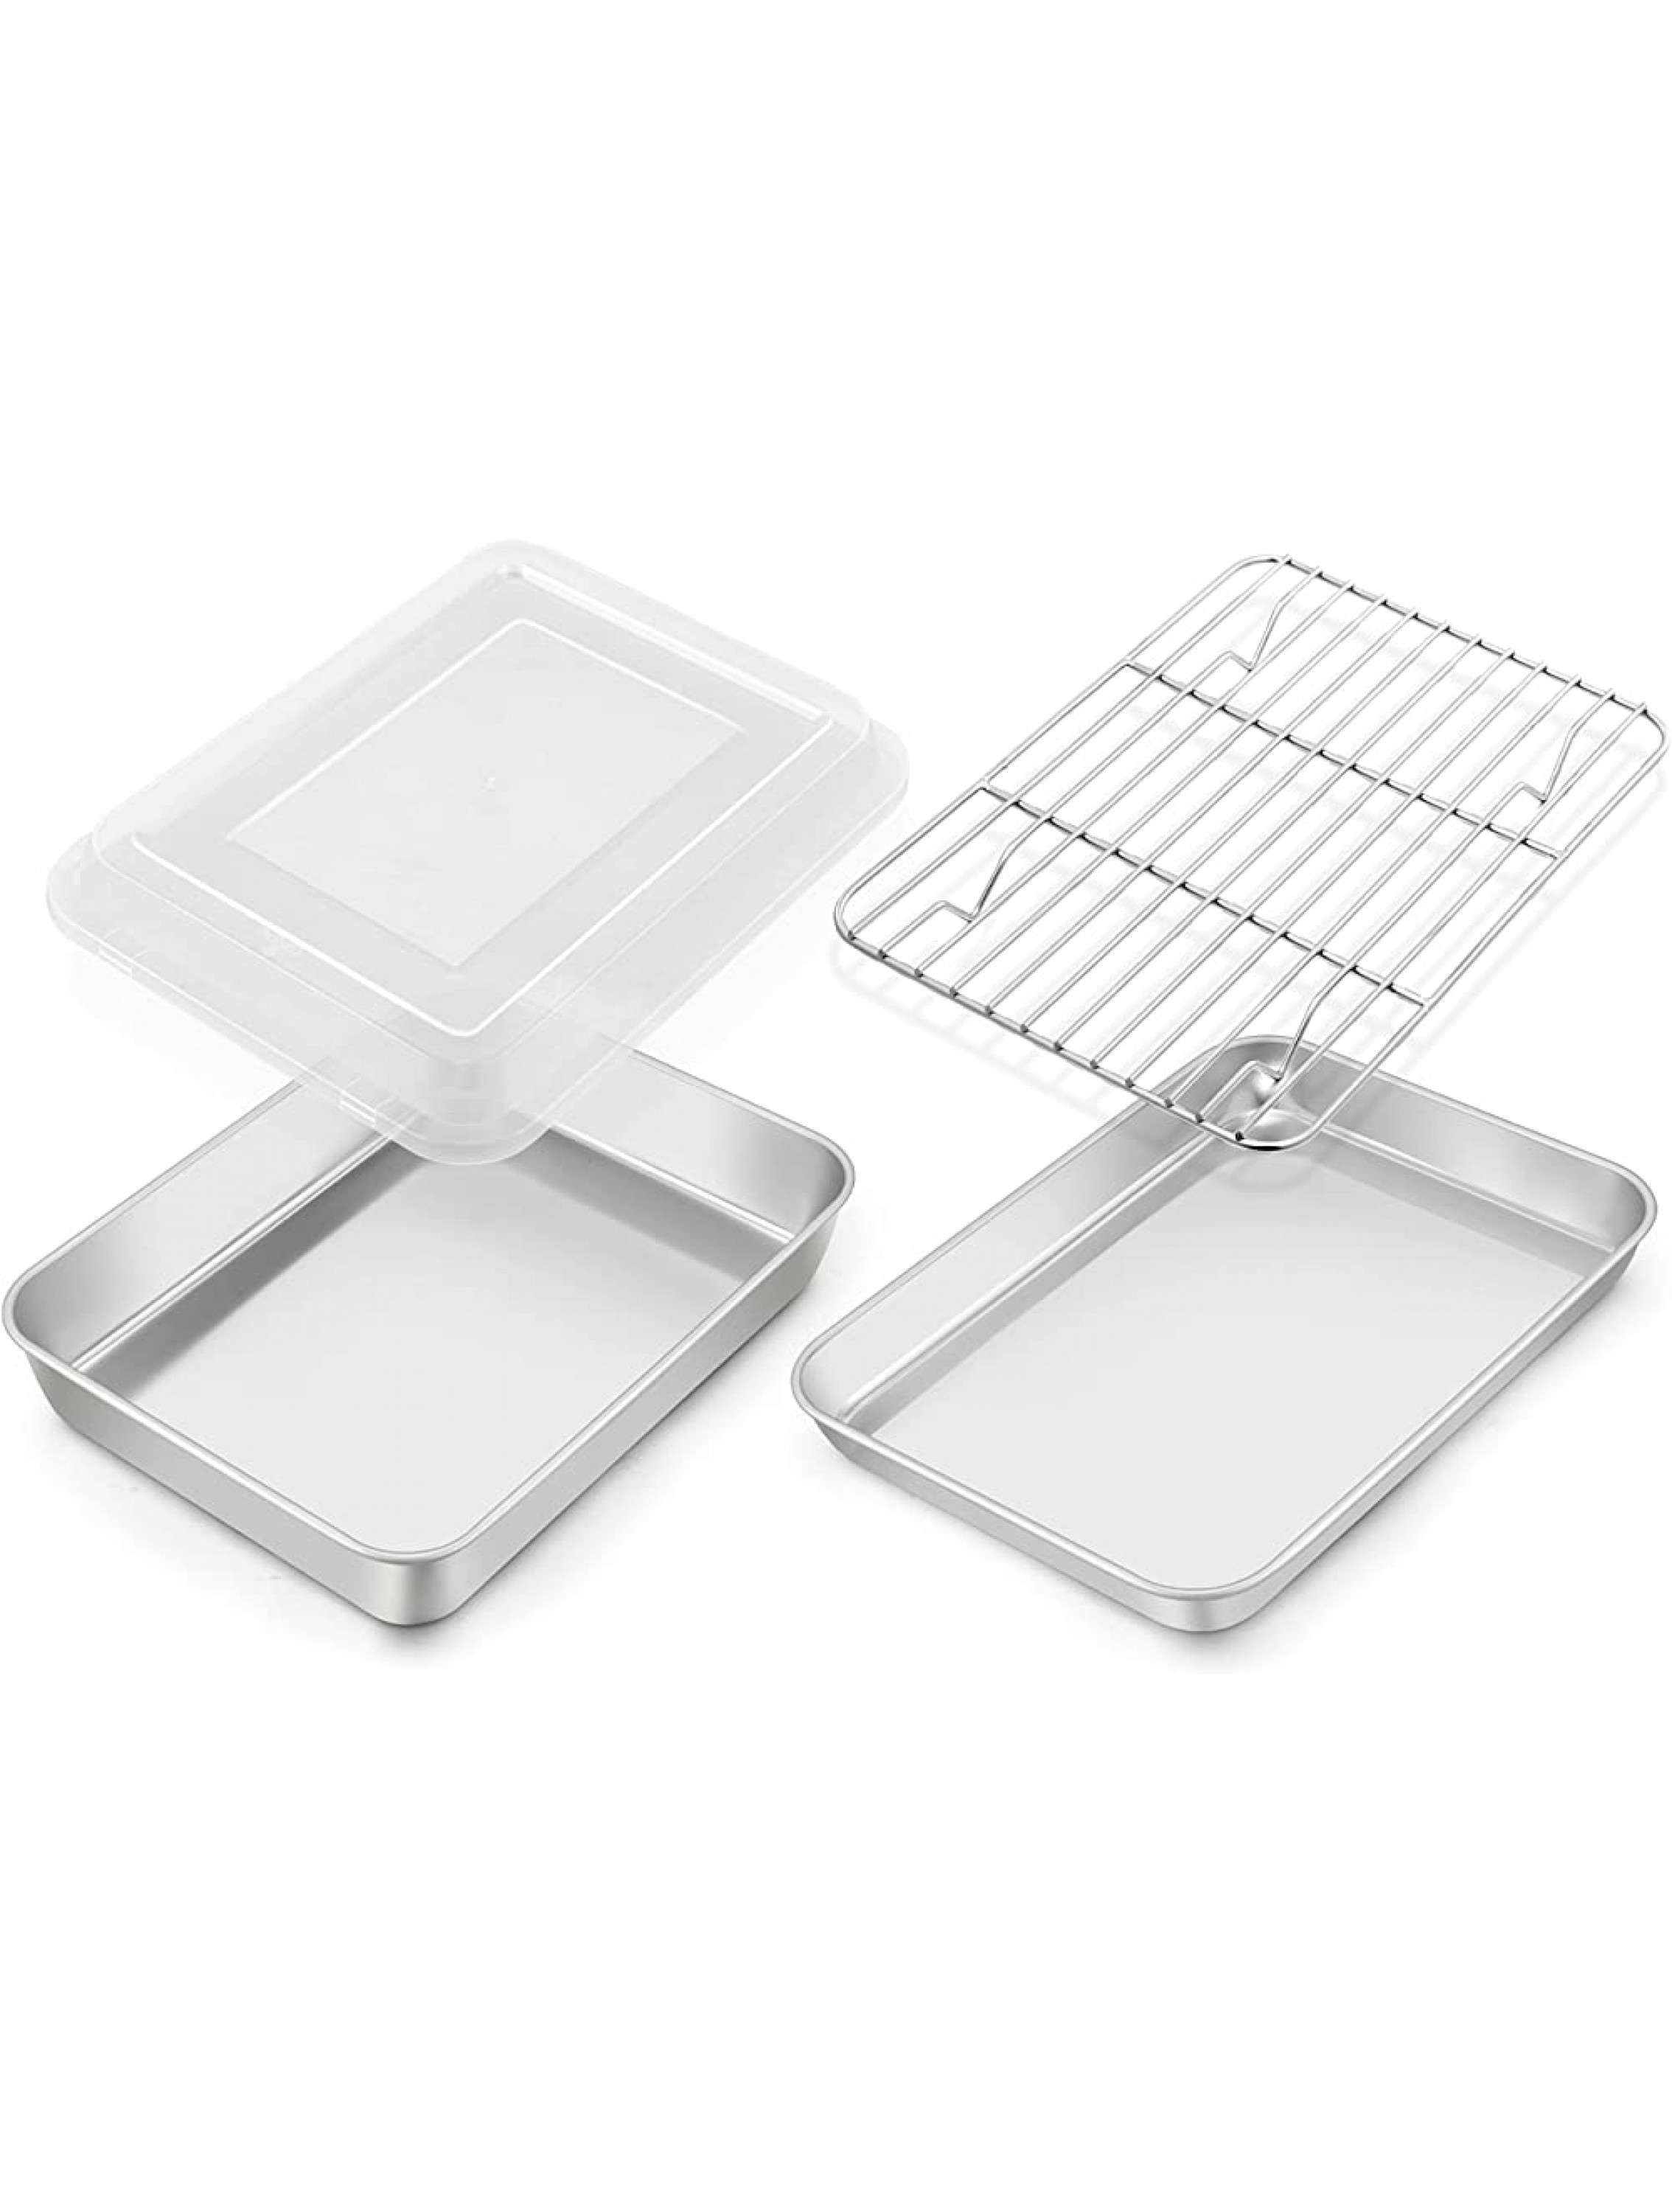 TeamFar Toaster Oven Pan 9.3’’ x 7’’ Stainless Steel Mini Rectangular Cookware Baking Roasting Cake Pan with Cooling Rack and Lid Healthy & Sturdy Deep & Visible Lid Dishwasher Safe – 4 PCS - BMECLAENG